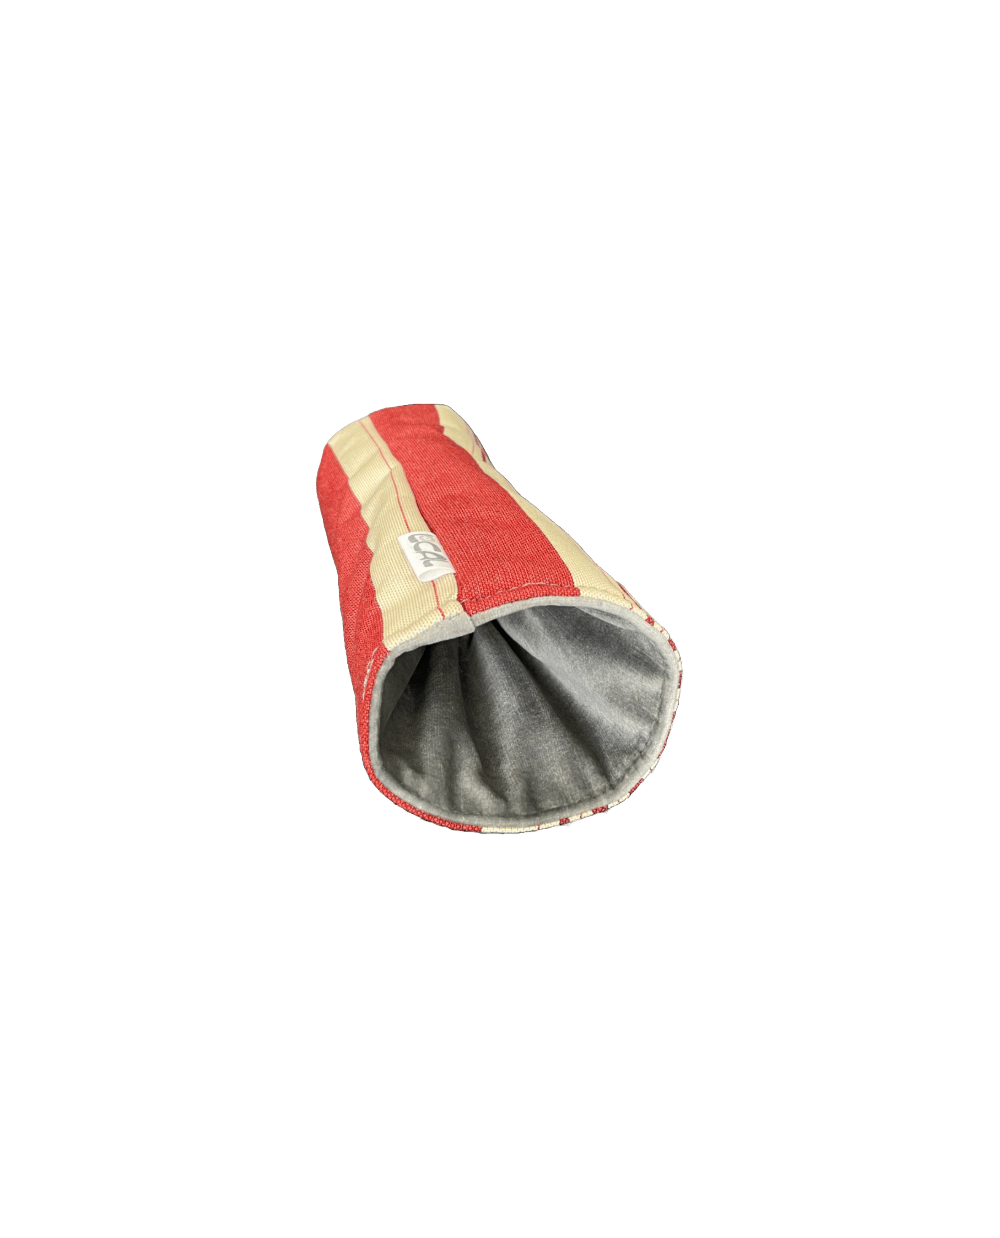 Red and Cream Canvas Head Cover